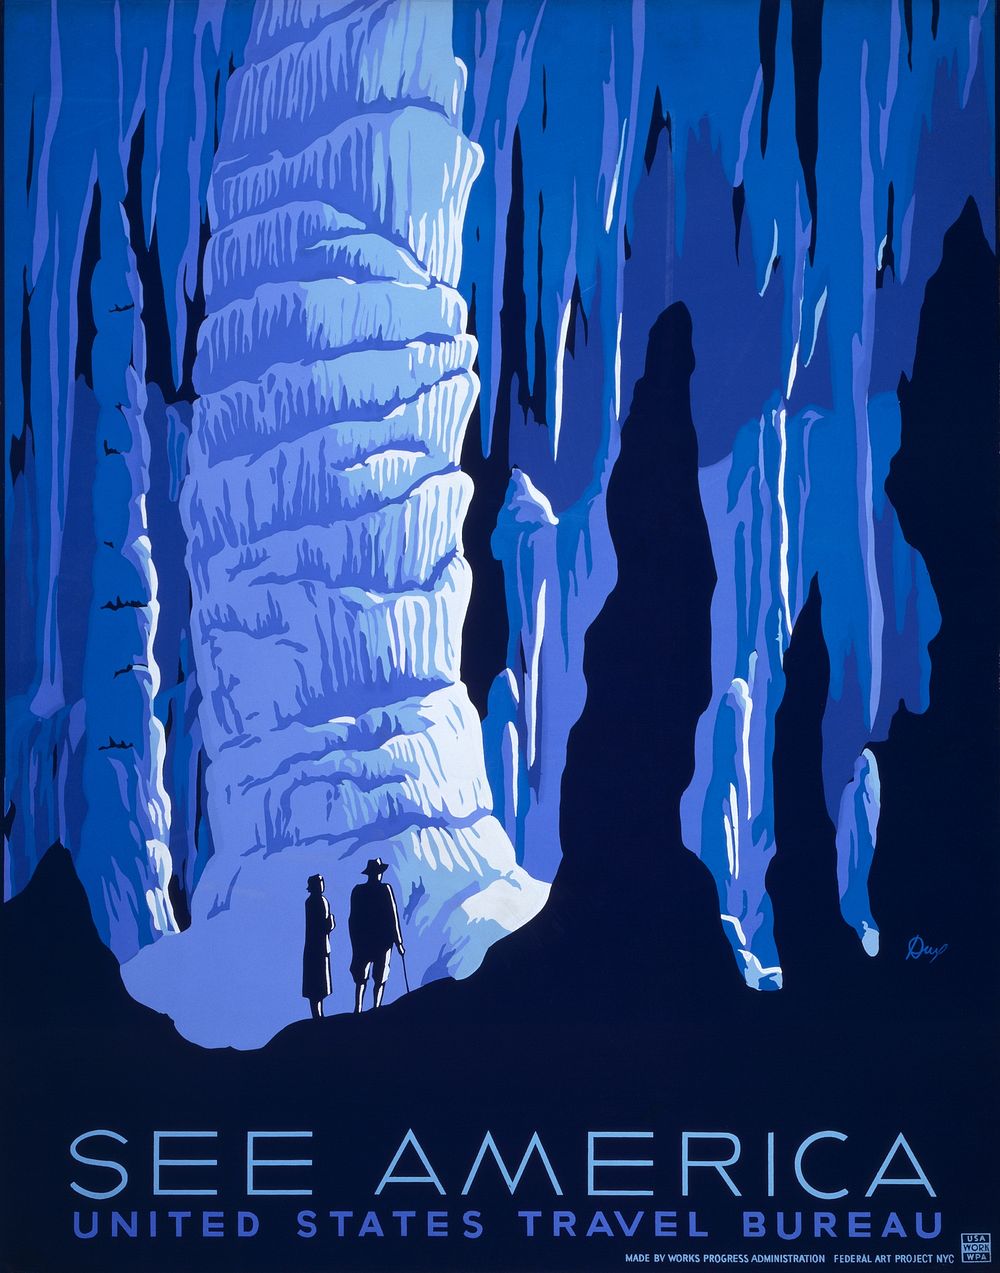 See America (1936) travel poster by Alexander Dux. Original public domain image from the Library of Congress. Digitally…